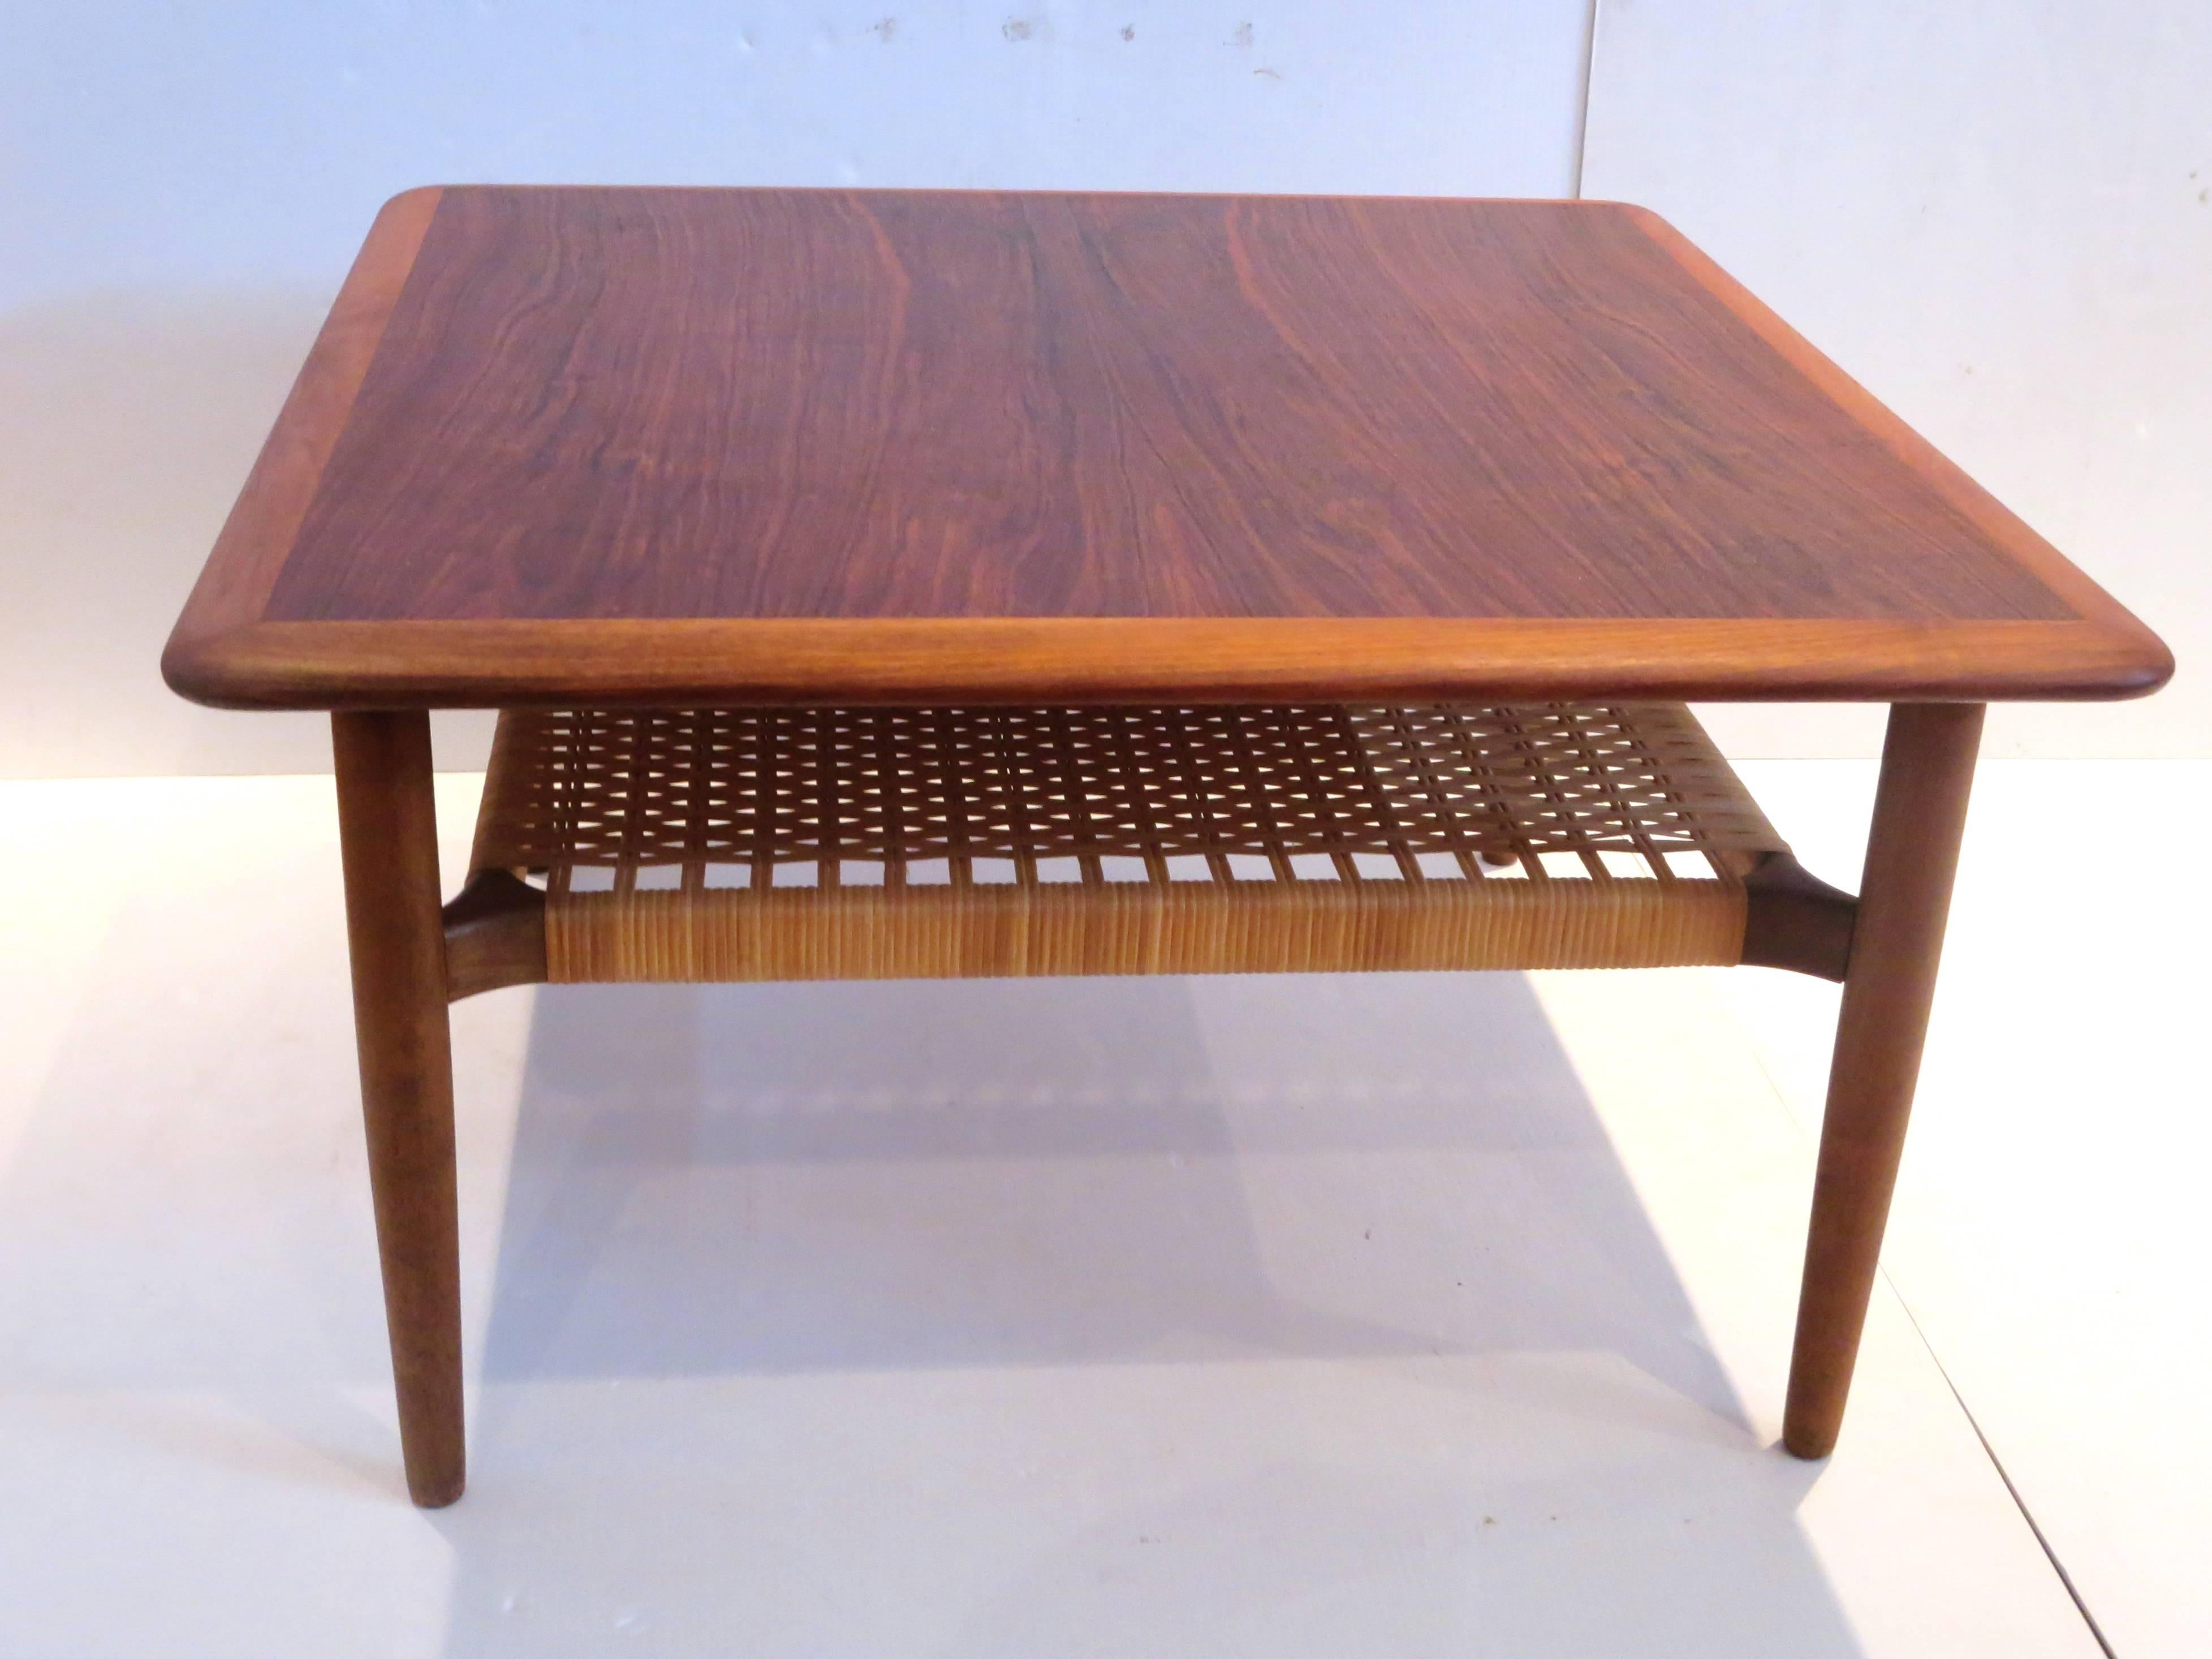 Danish Modern 1950s Square Coffee Table with Caned Shelf by Gunnar Schwartz 1